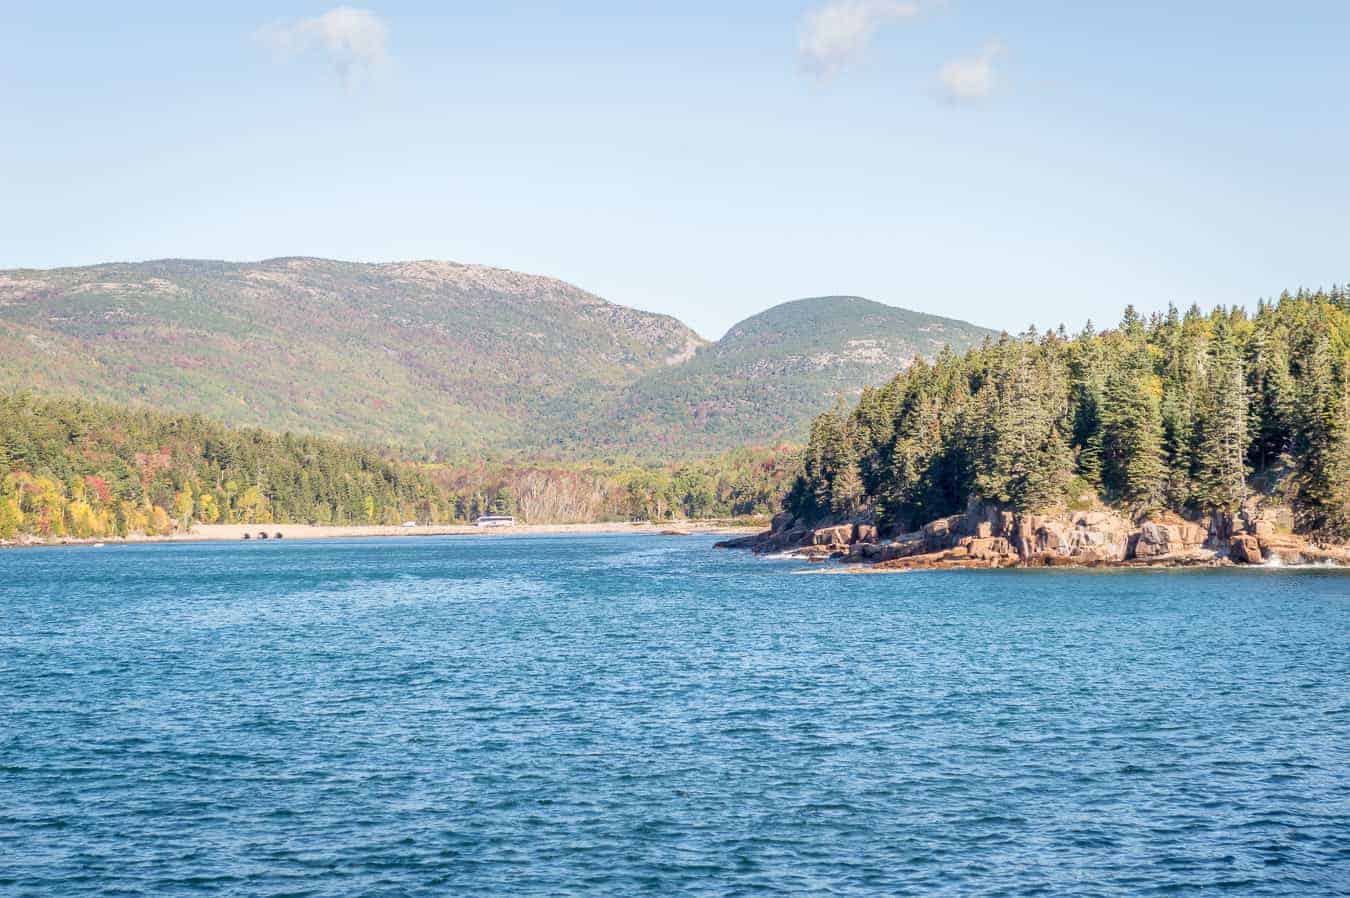 Blue lake with waves surrounded by mountains and forests under a blue cloudy sky is one of the top Acadia National Park things to do